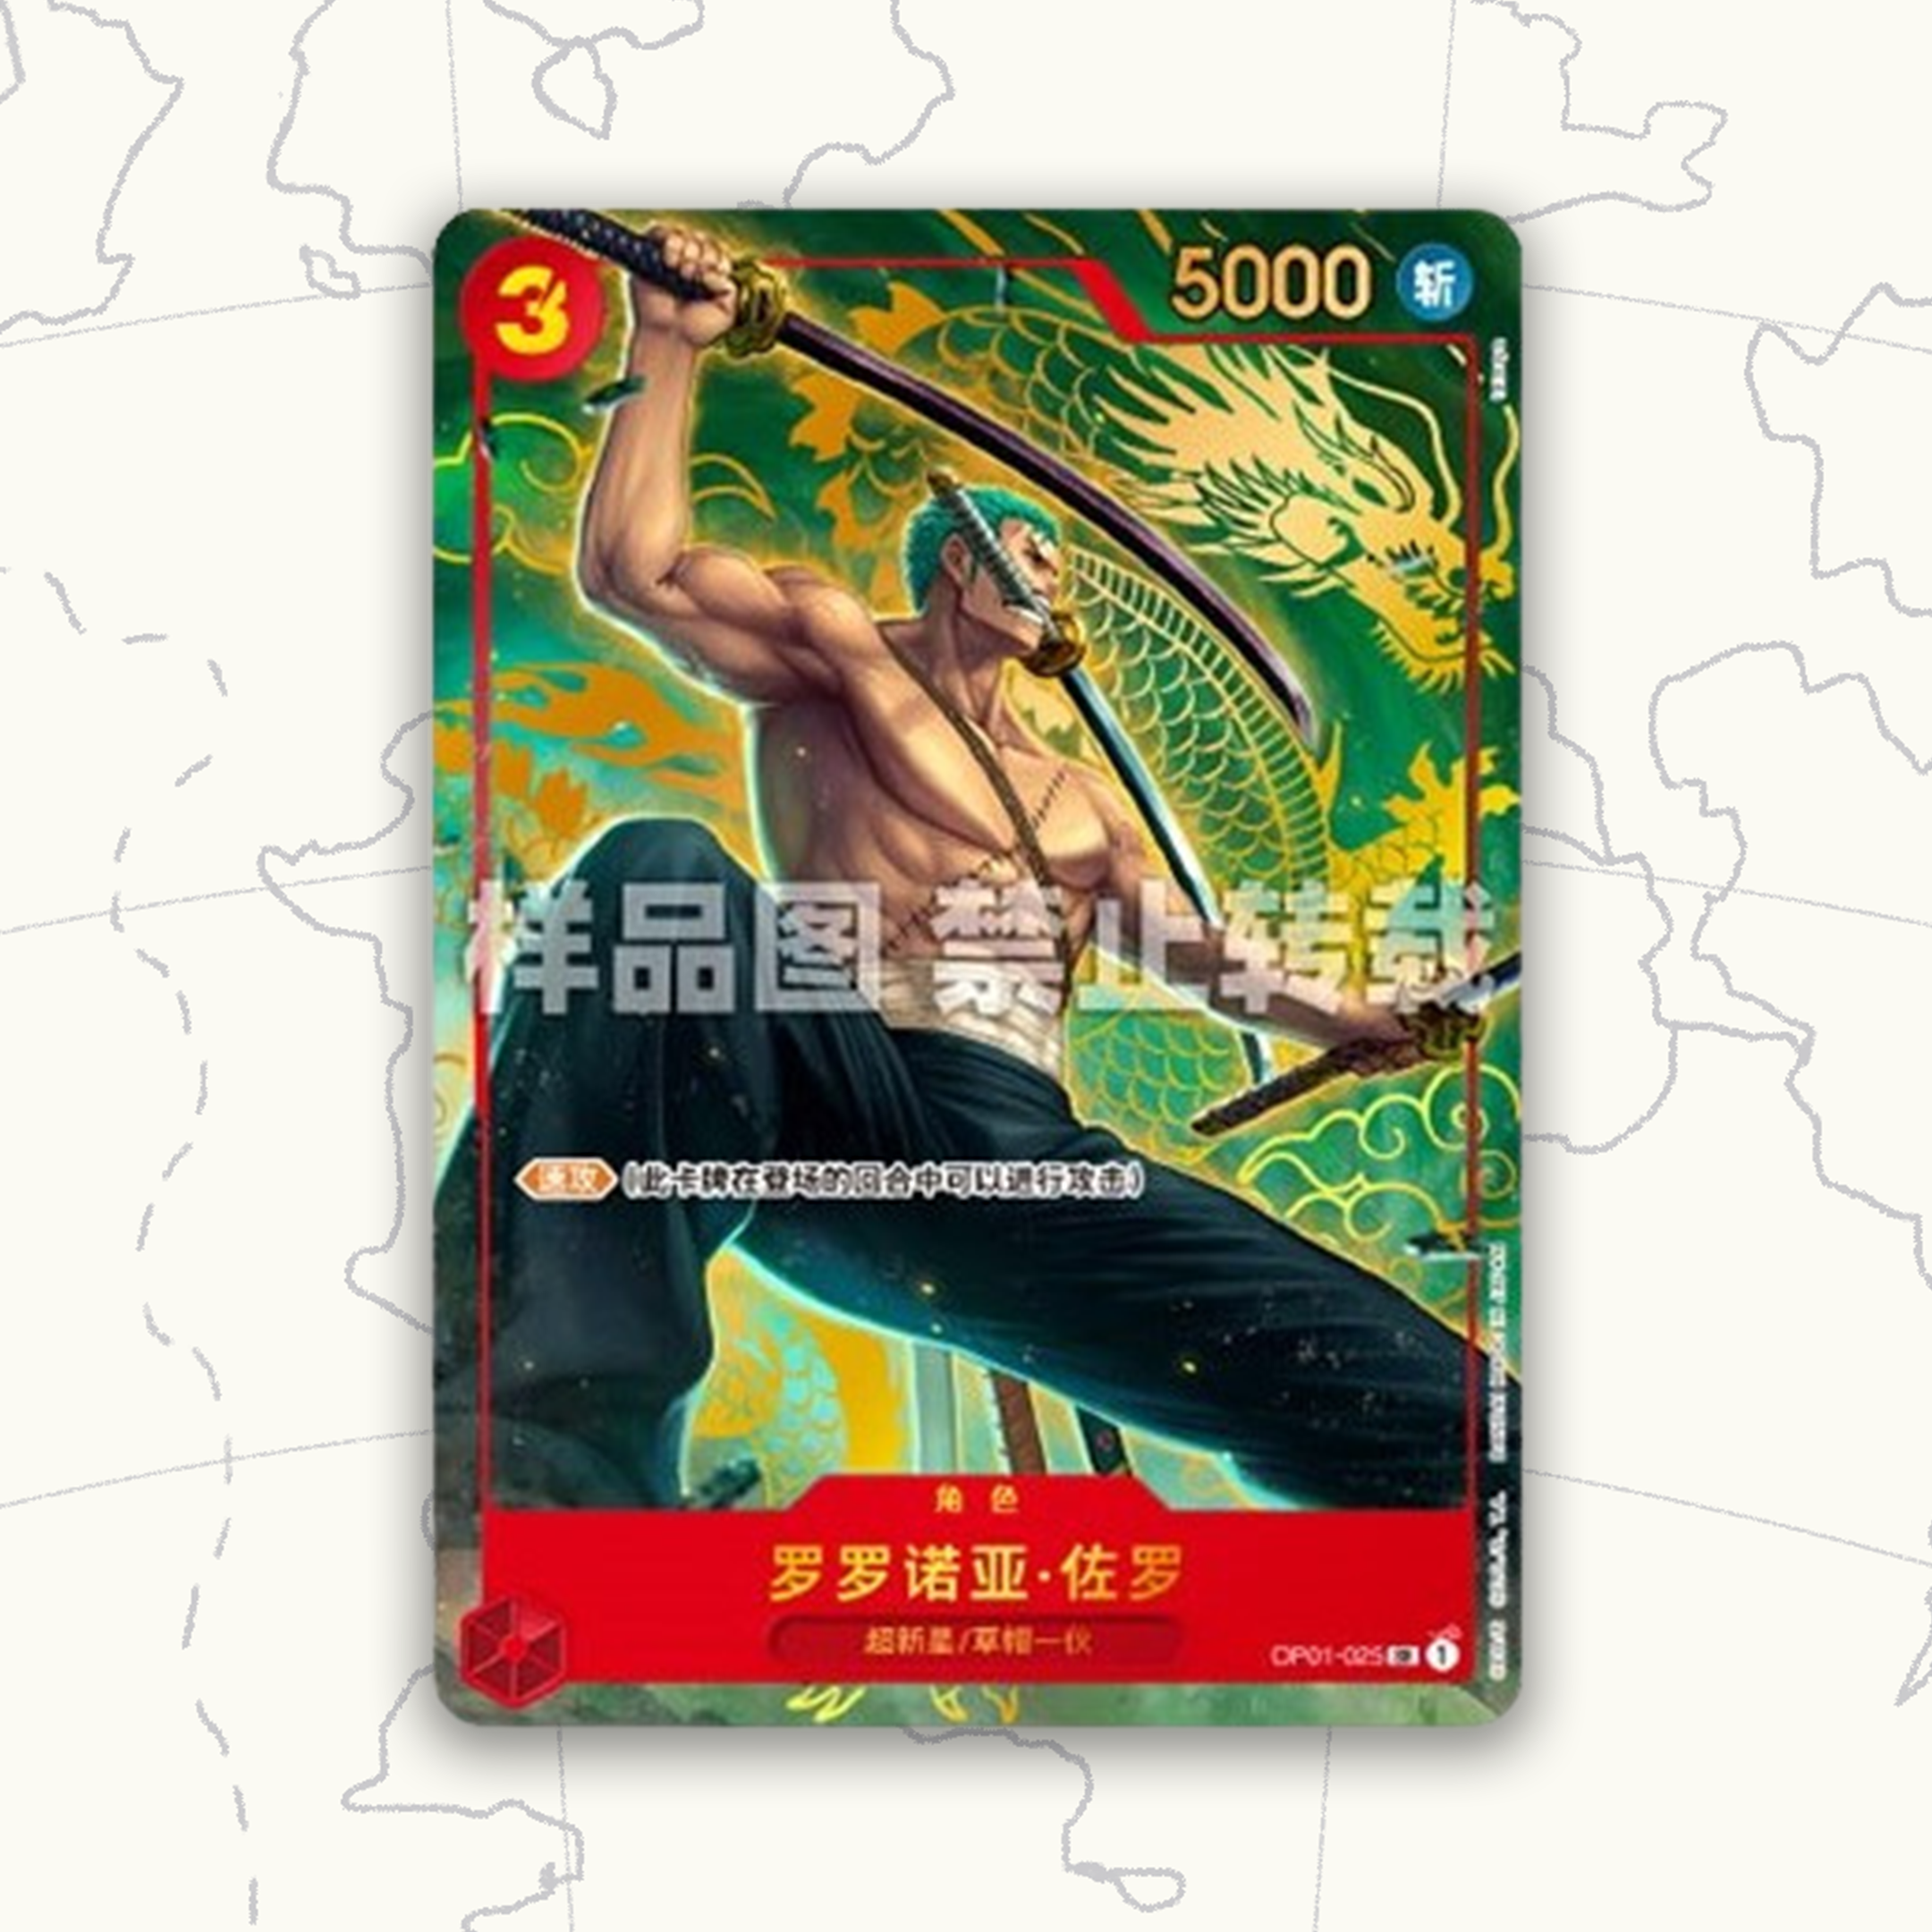 ONE PIECE CARD GAME - Chinese 1st Anniversary Limited Edition Promo Card - Zoro OP01-025